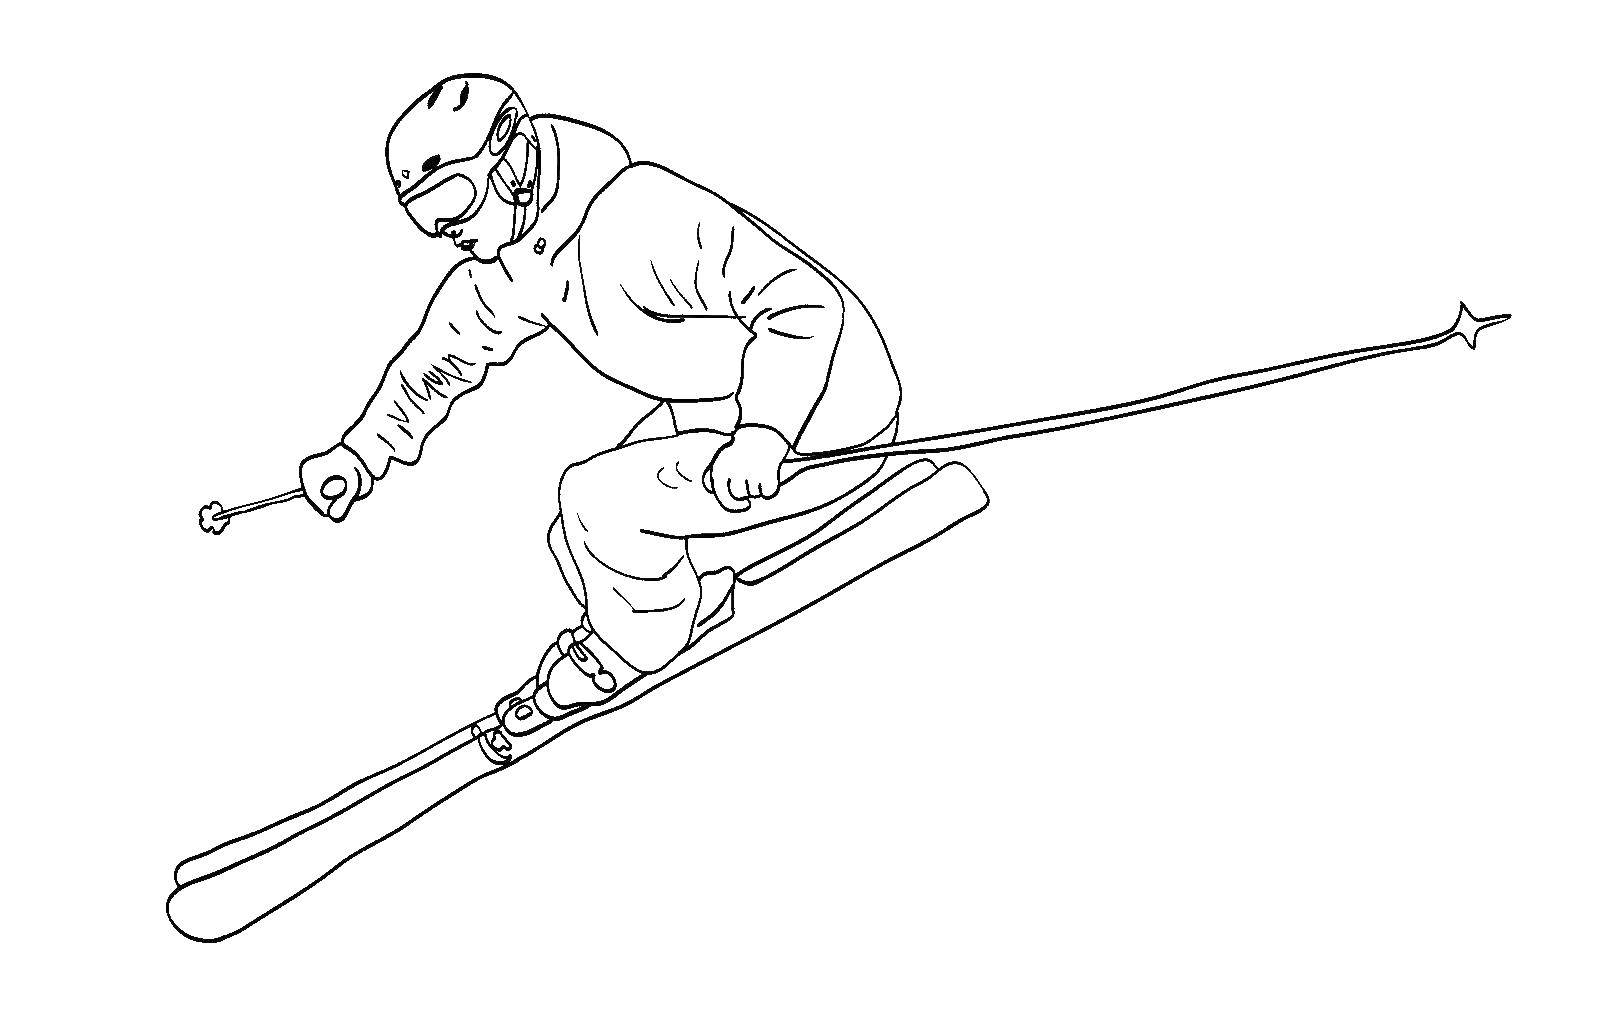 Coloring Skier slides from the mountain. Category sports. Tags:  skiing, boy.